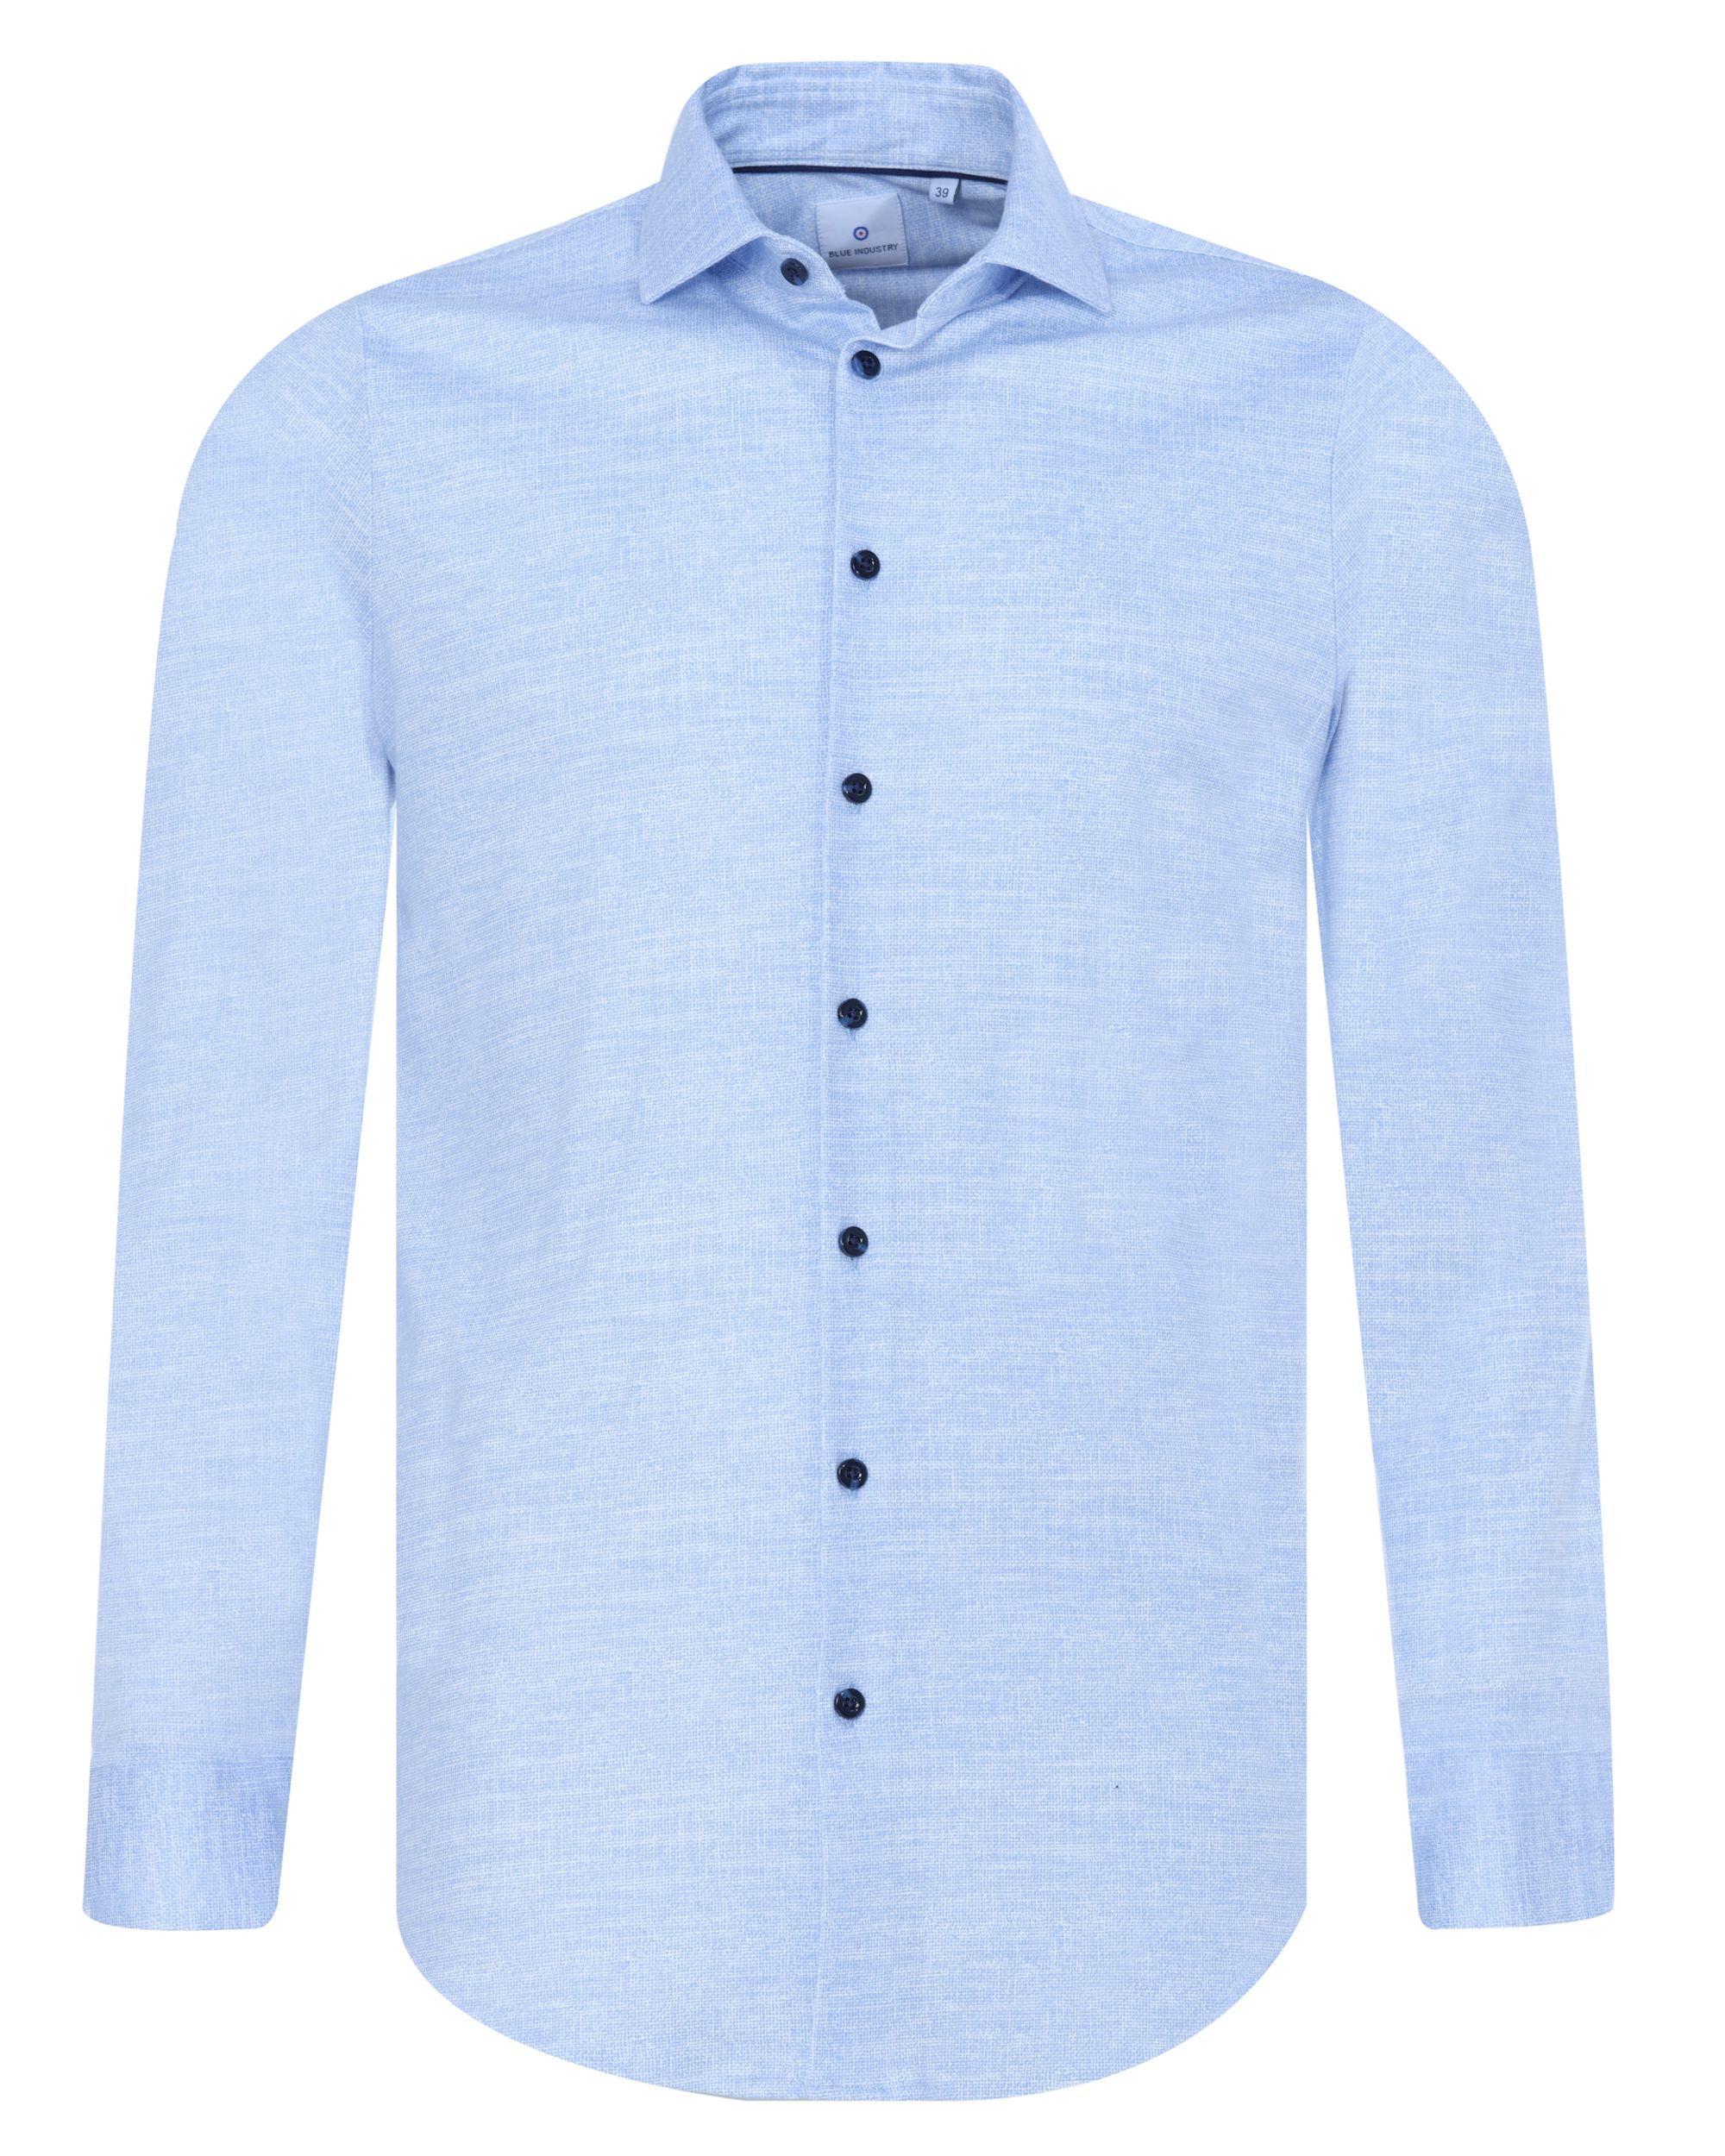 Blue Industry Casual Overhemd LM Blauw 082720-001-37